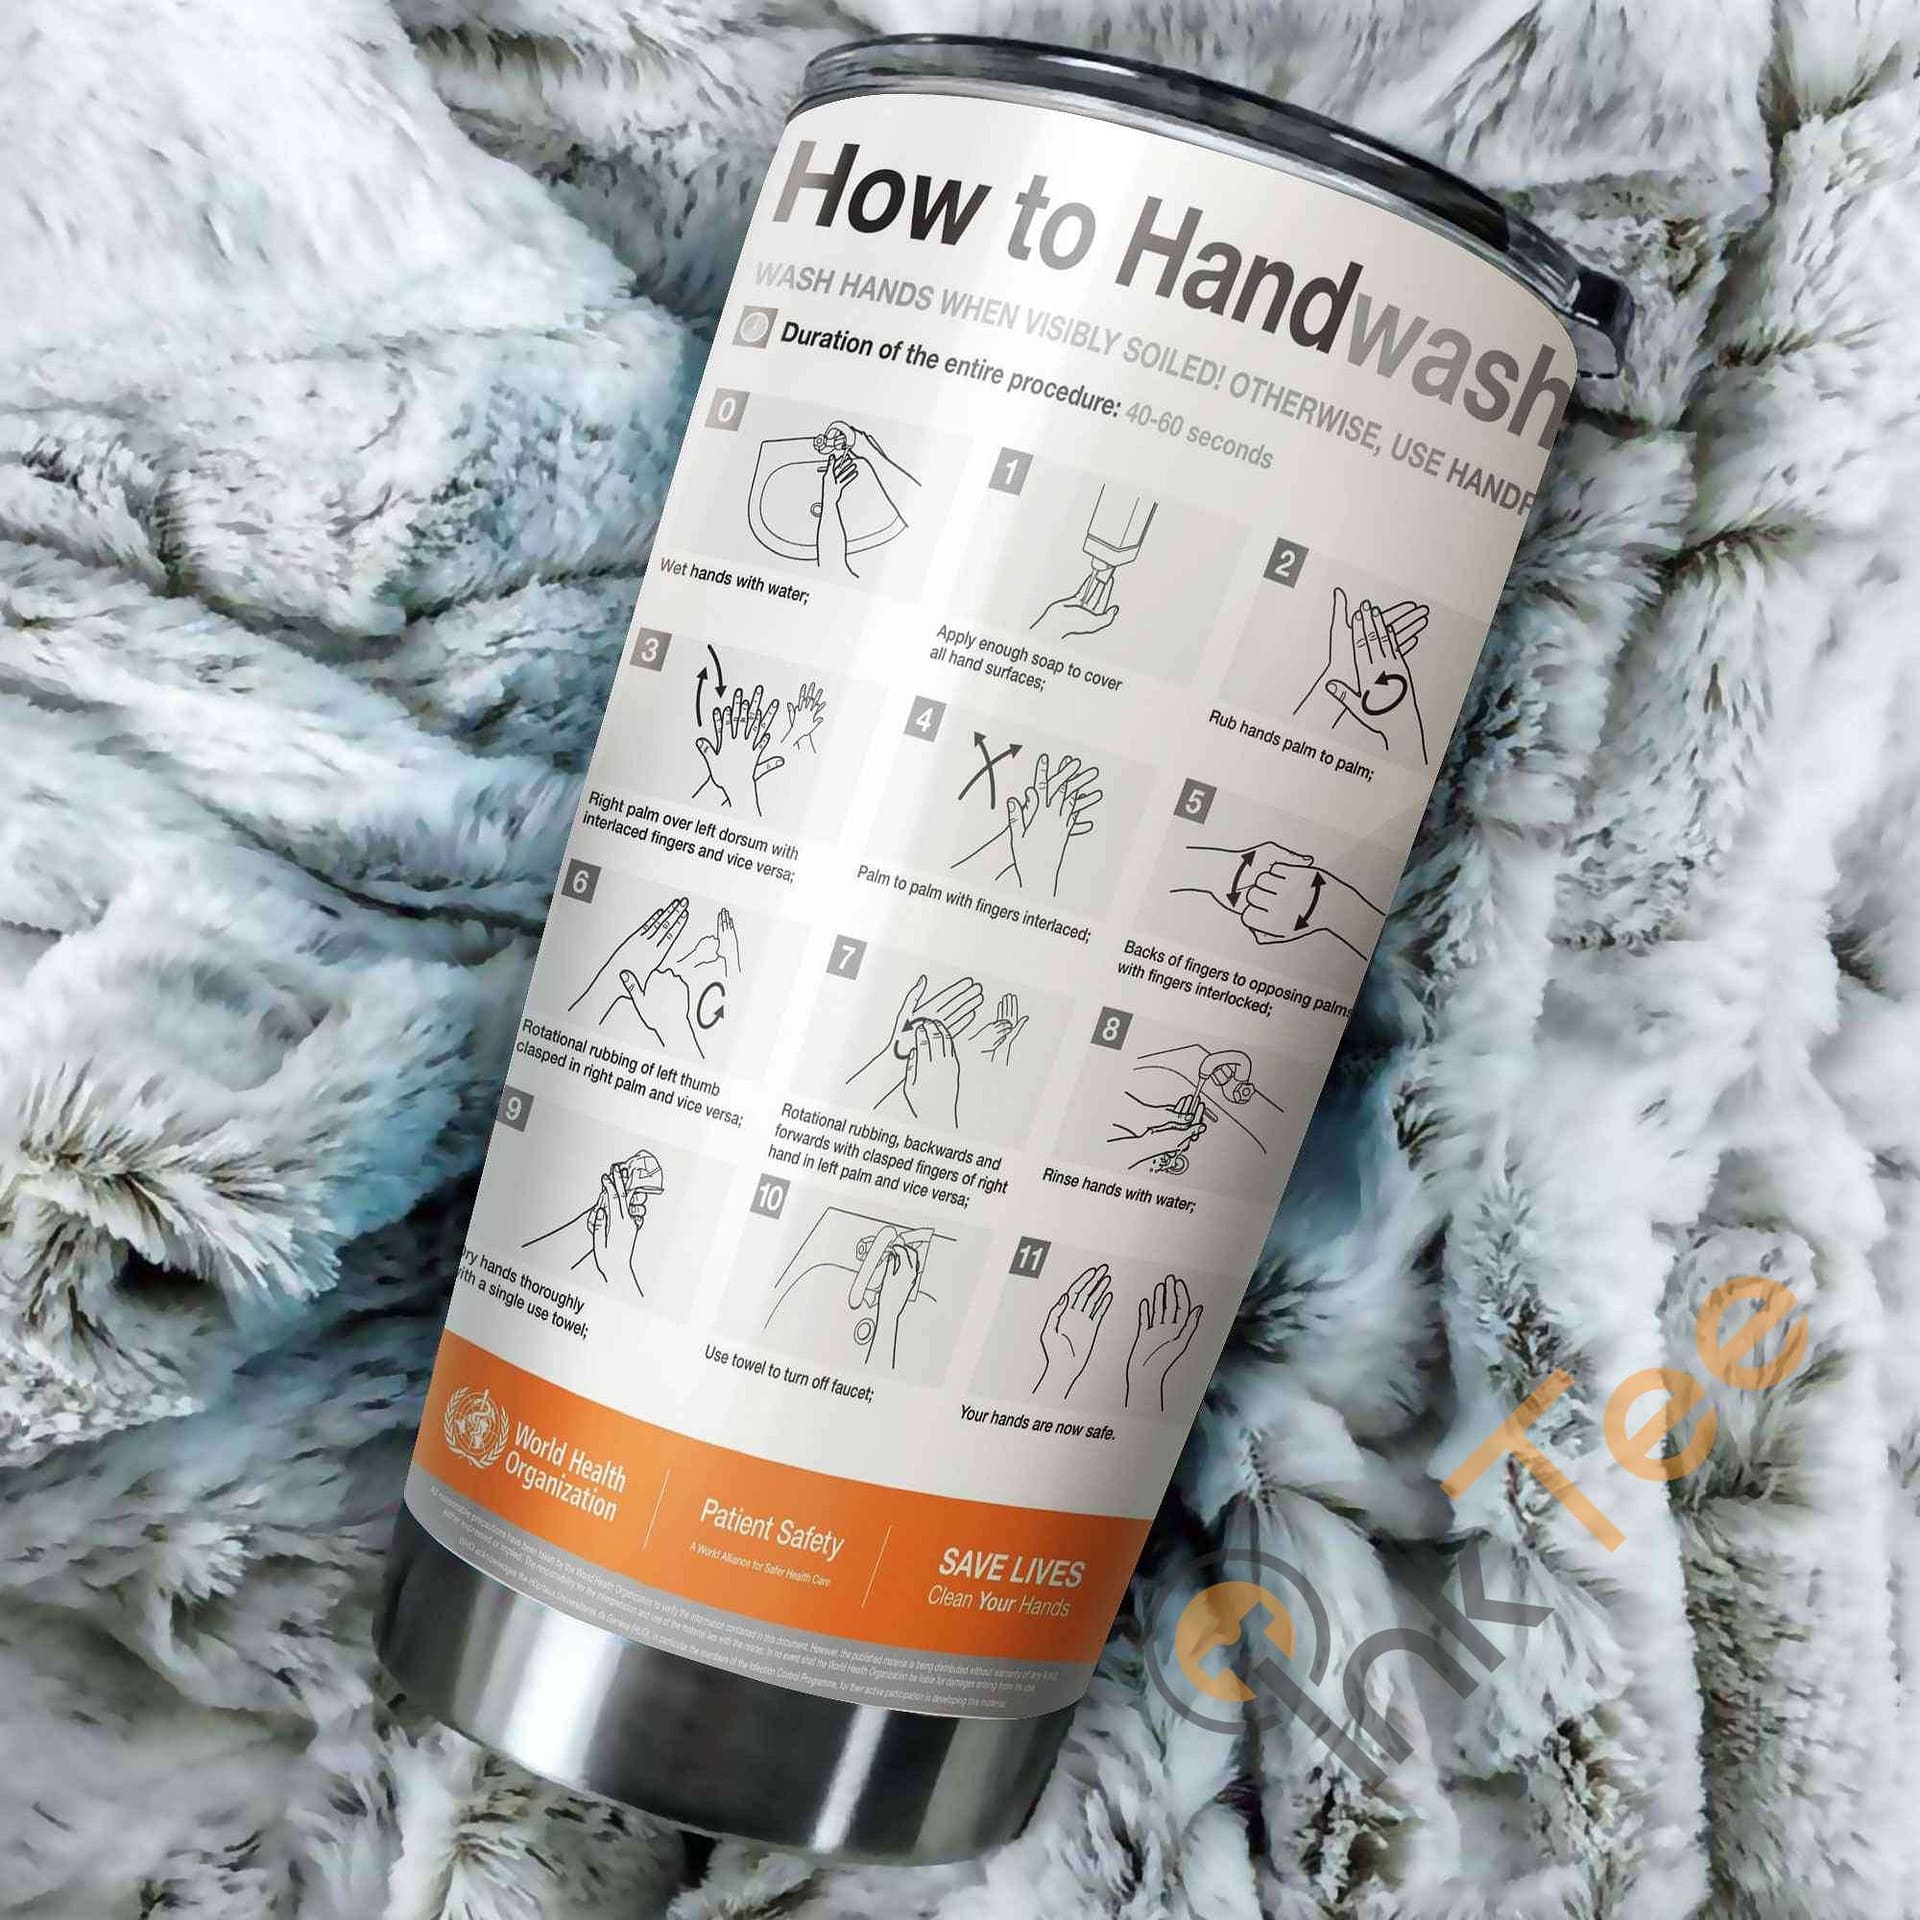 How To Handwash? Stainless Steel Tumbler